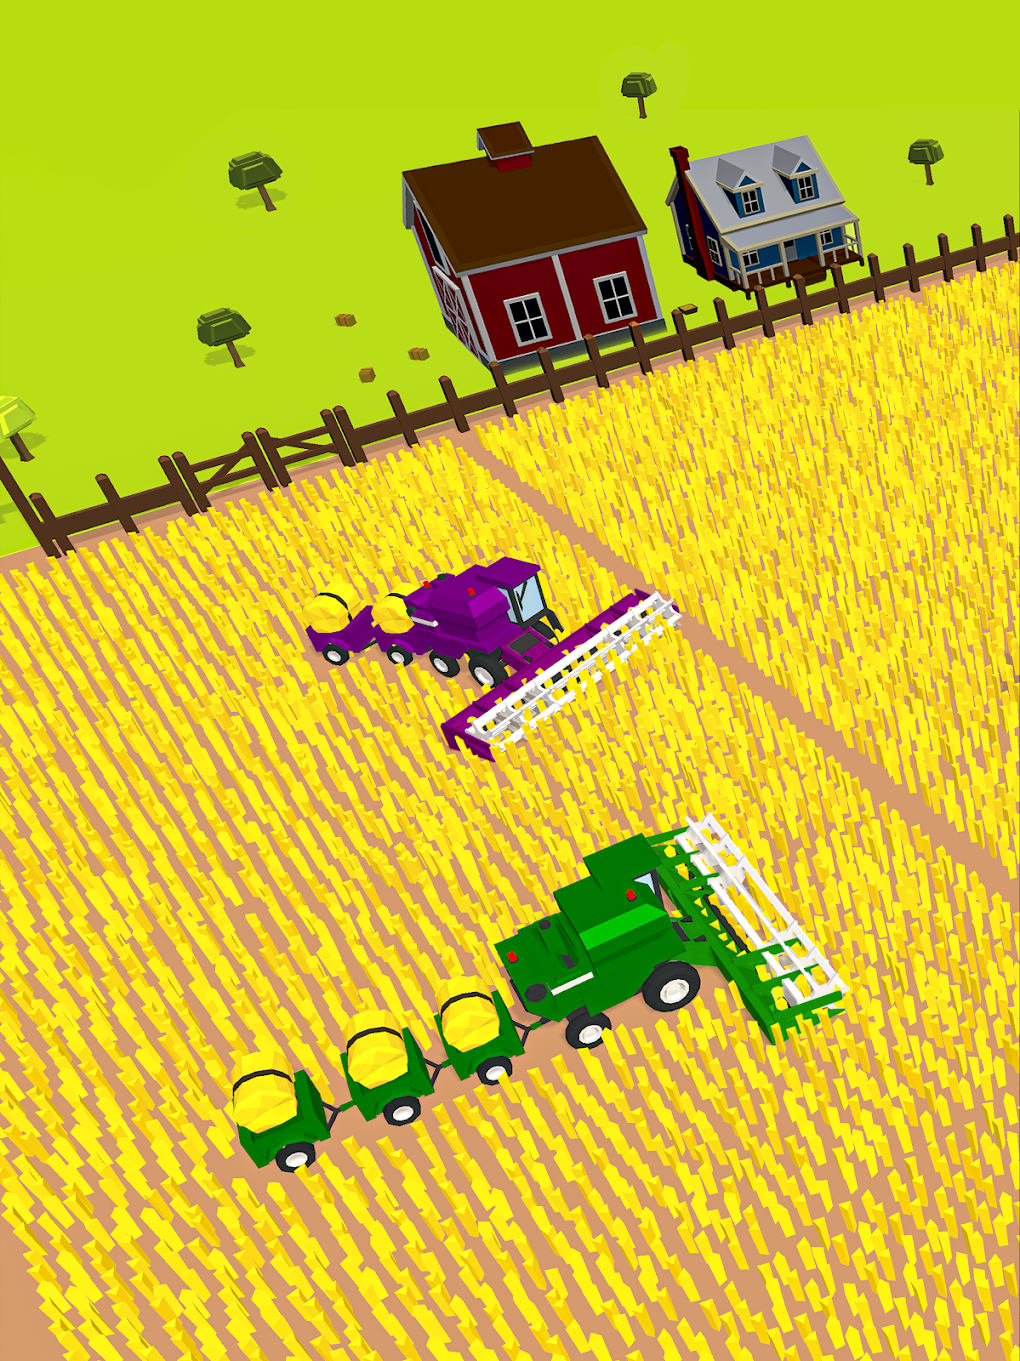 Harvest.io 3D Farming Arcade APK for Android - Download